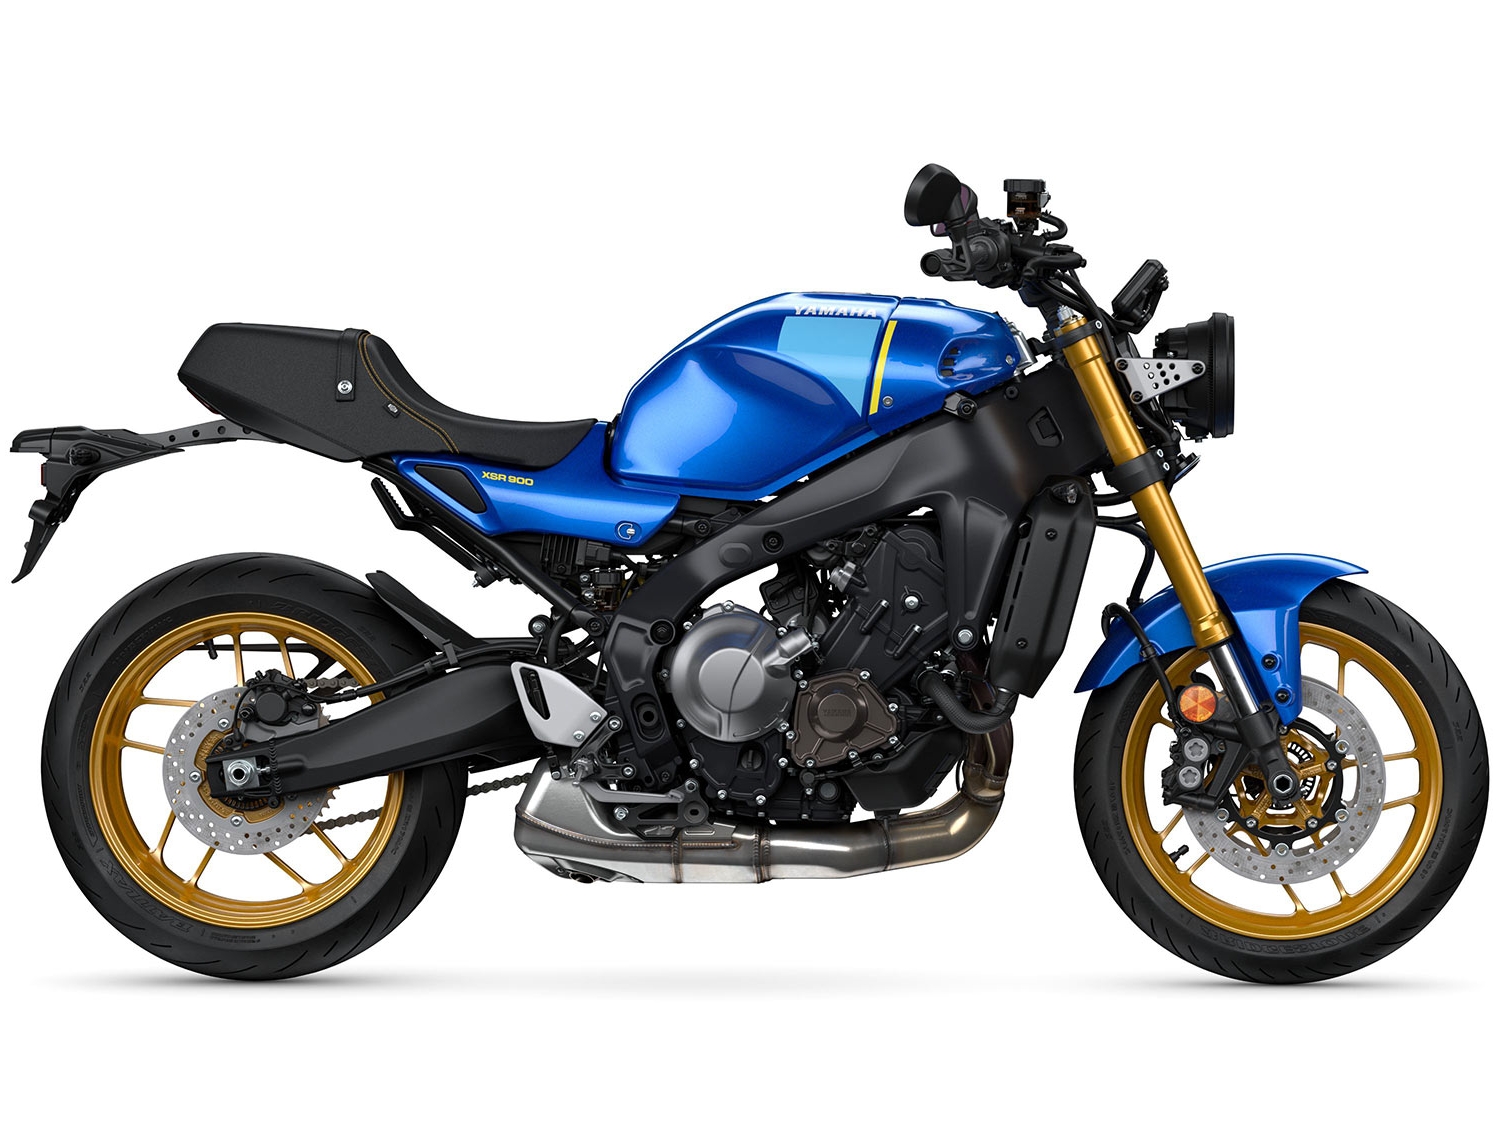 Honda CB650R vs Yamaha MT-07 - Know Which is Better